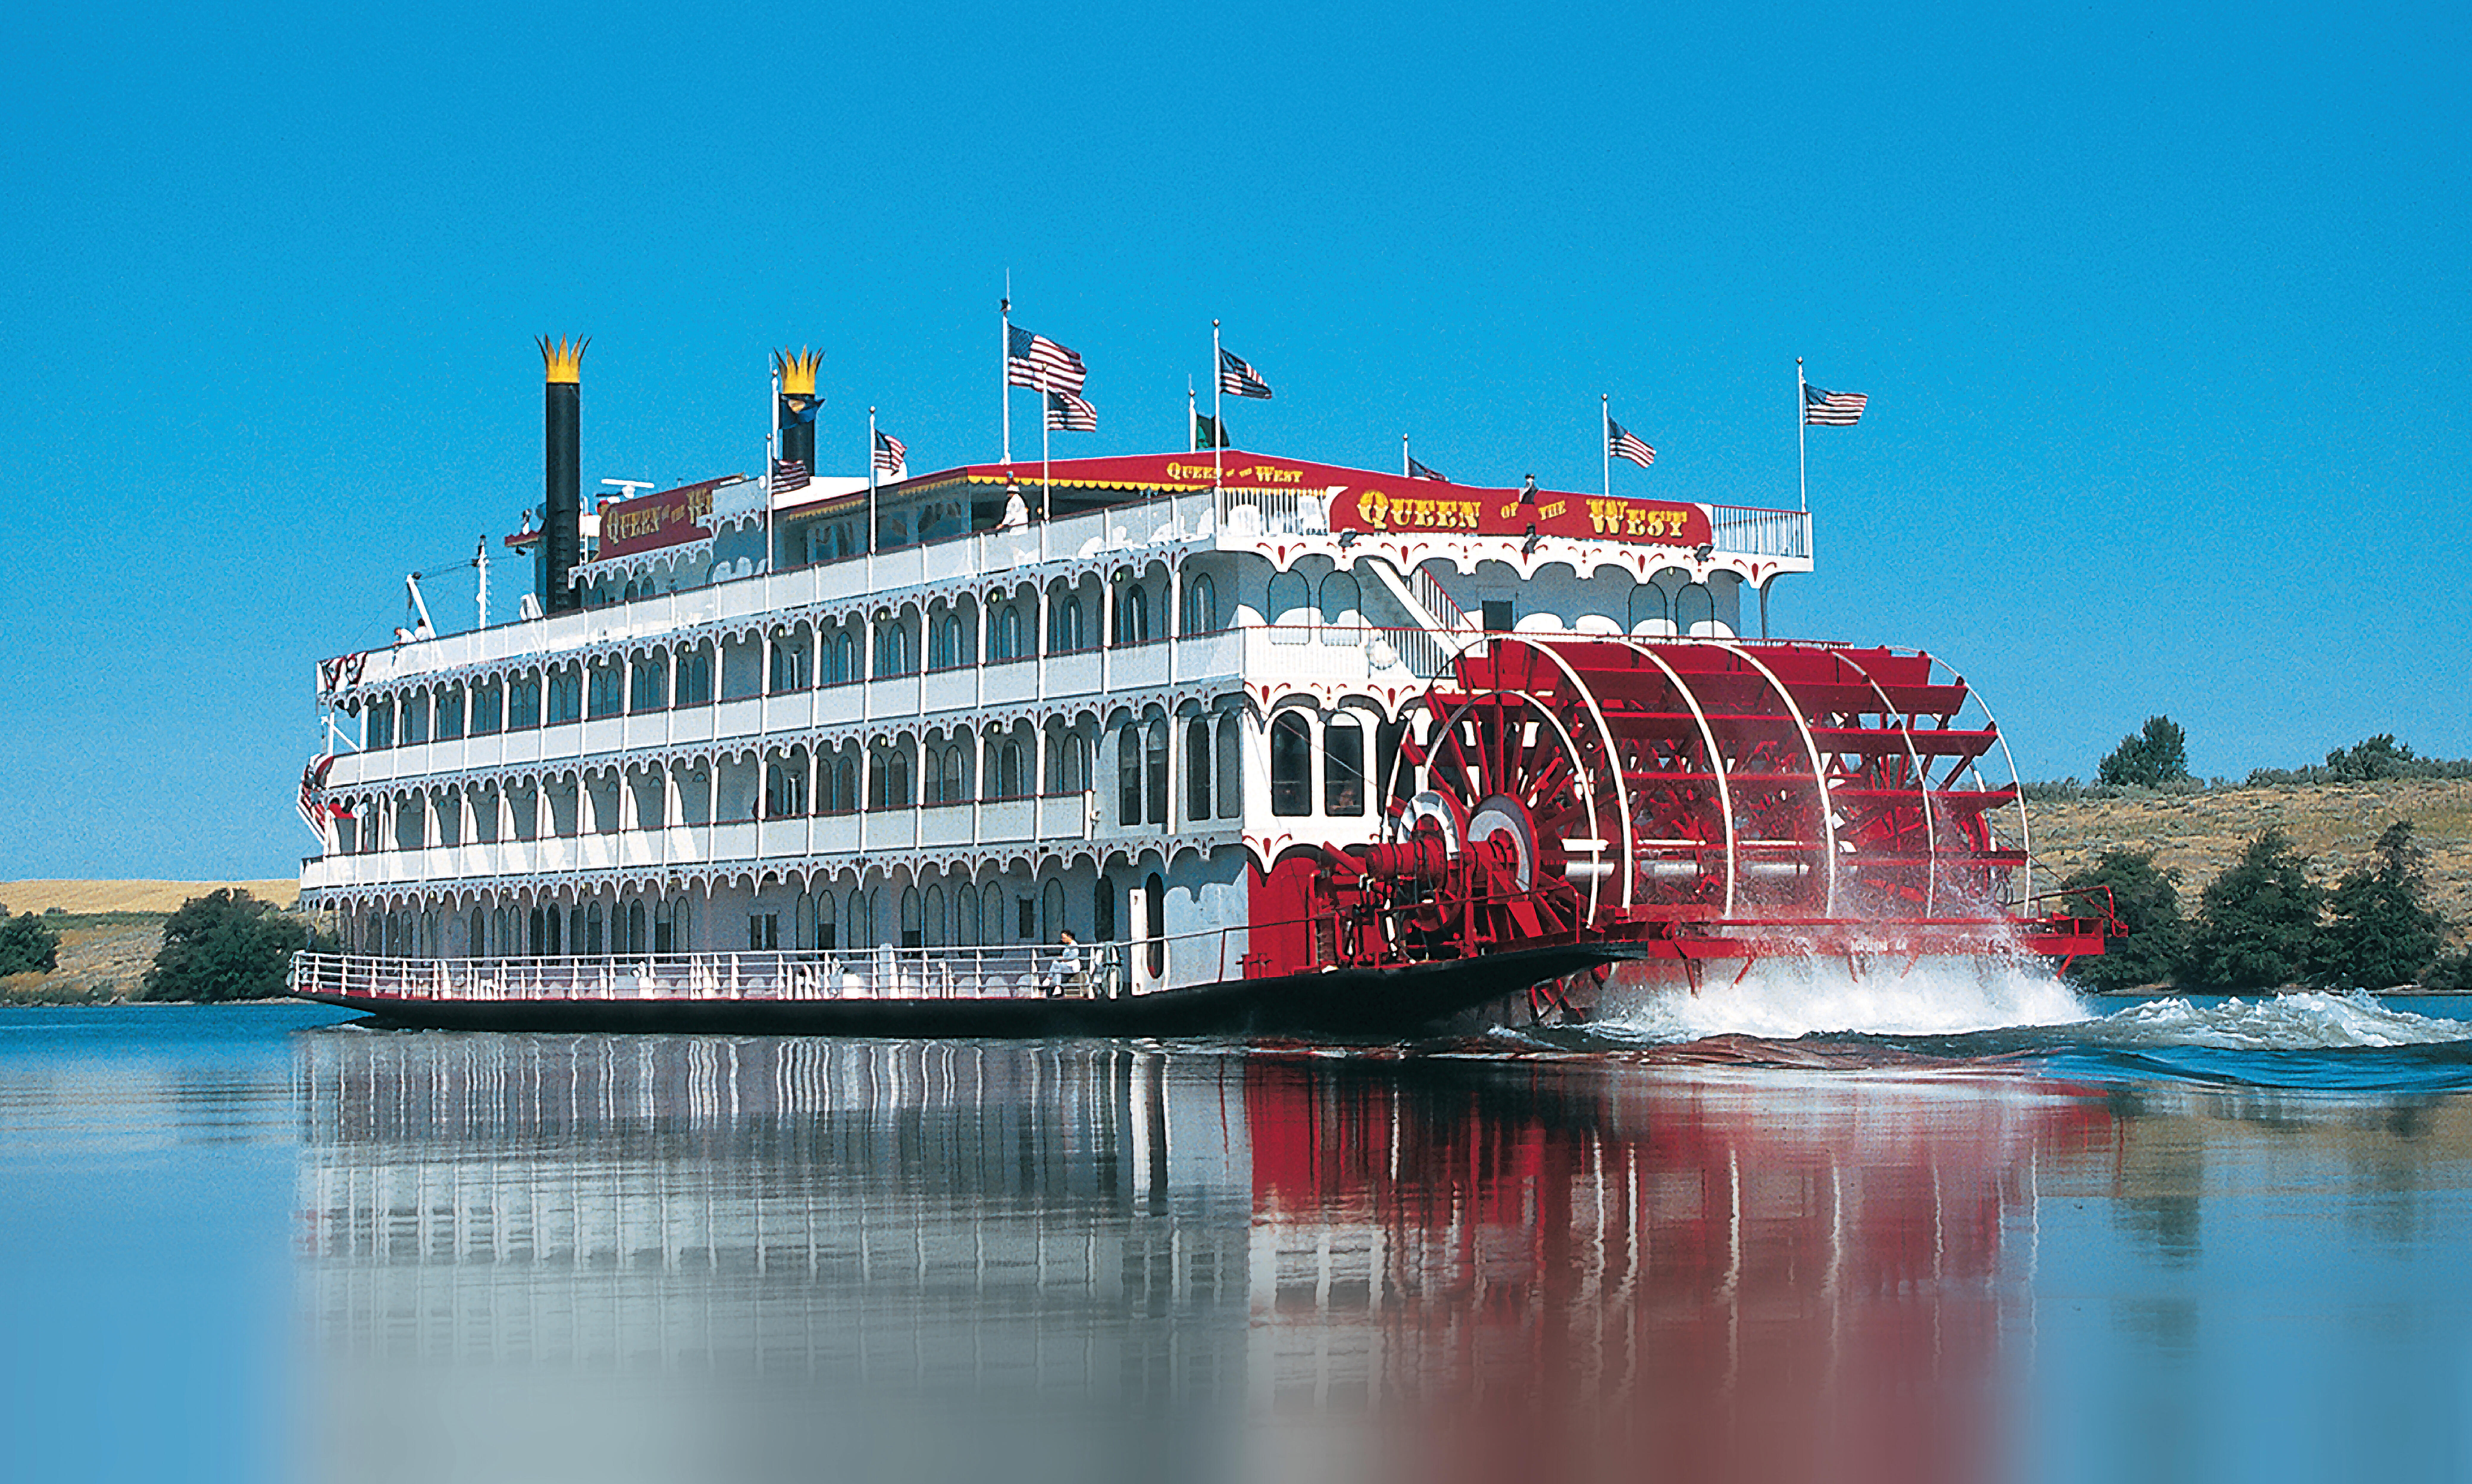 Queen of the West (Photo: American Cruise Lines)